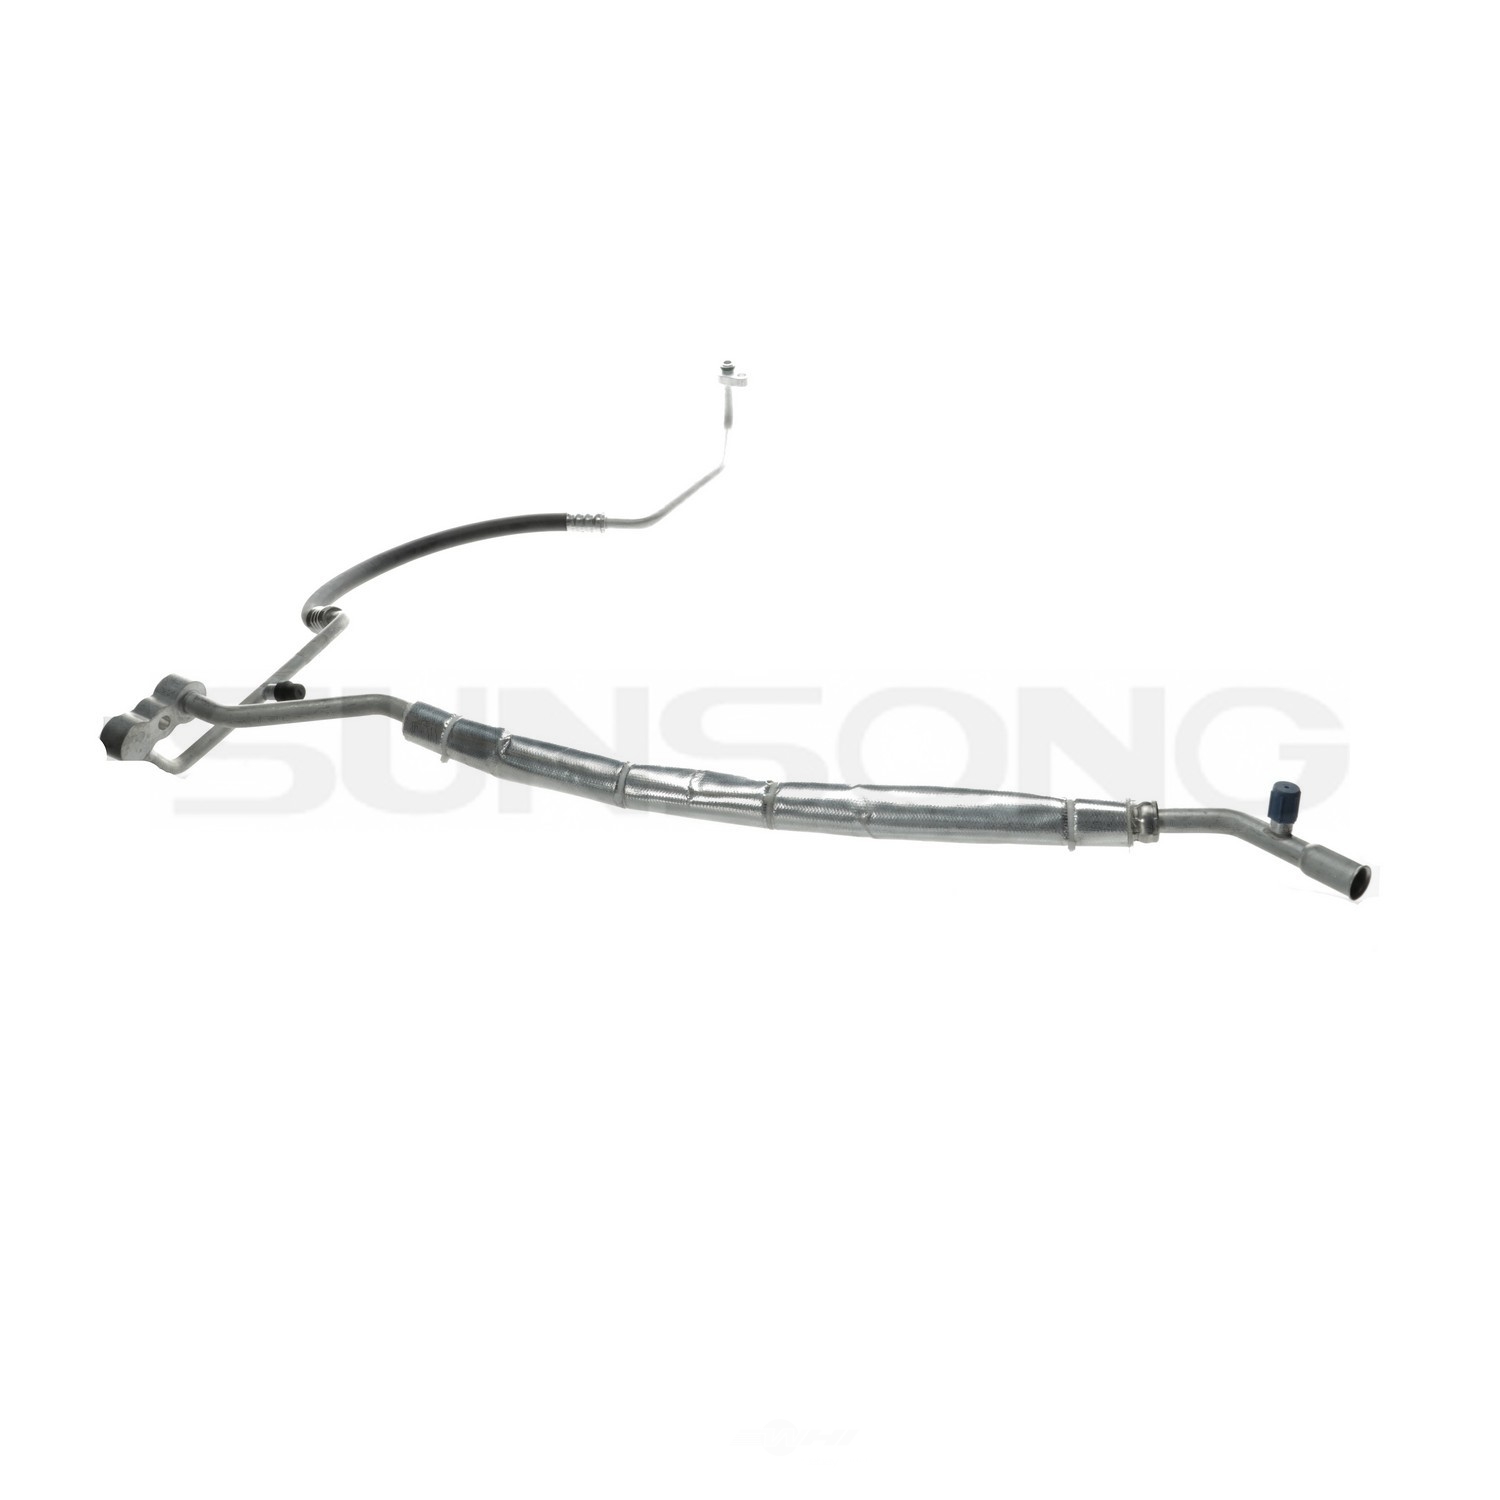 SUNSONG NORTH AMERICA - A/C Refrigerant Discharge / Suction Hose Assembly - SUG 5203233